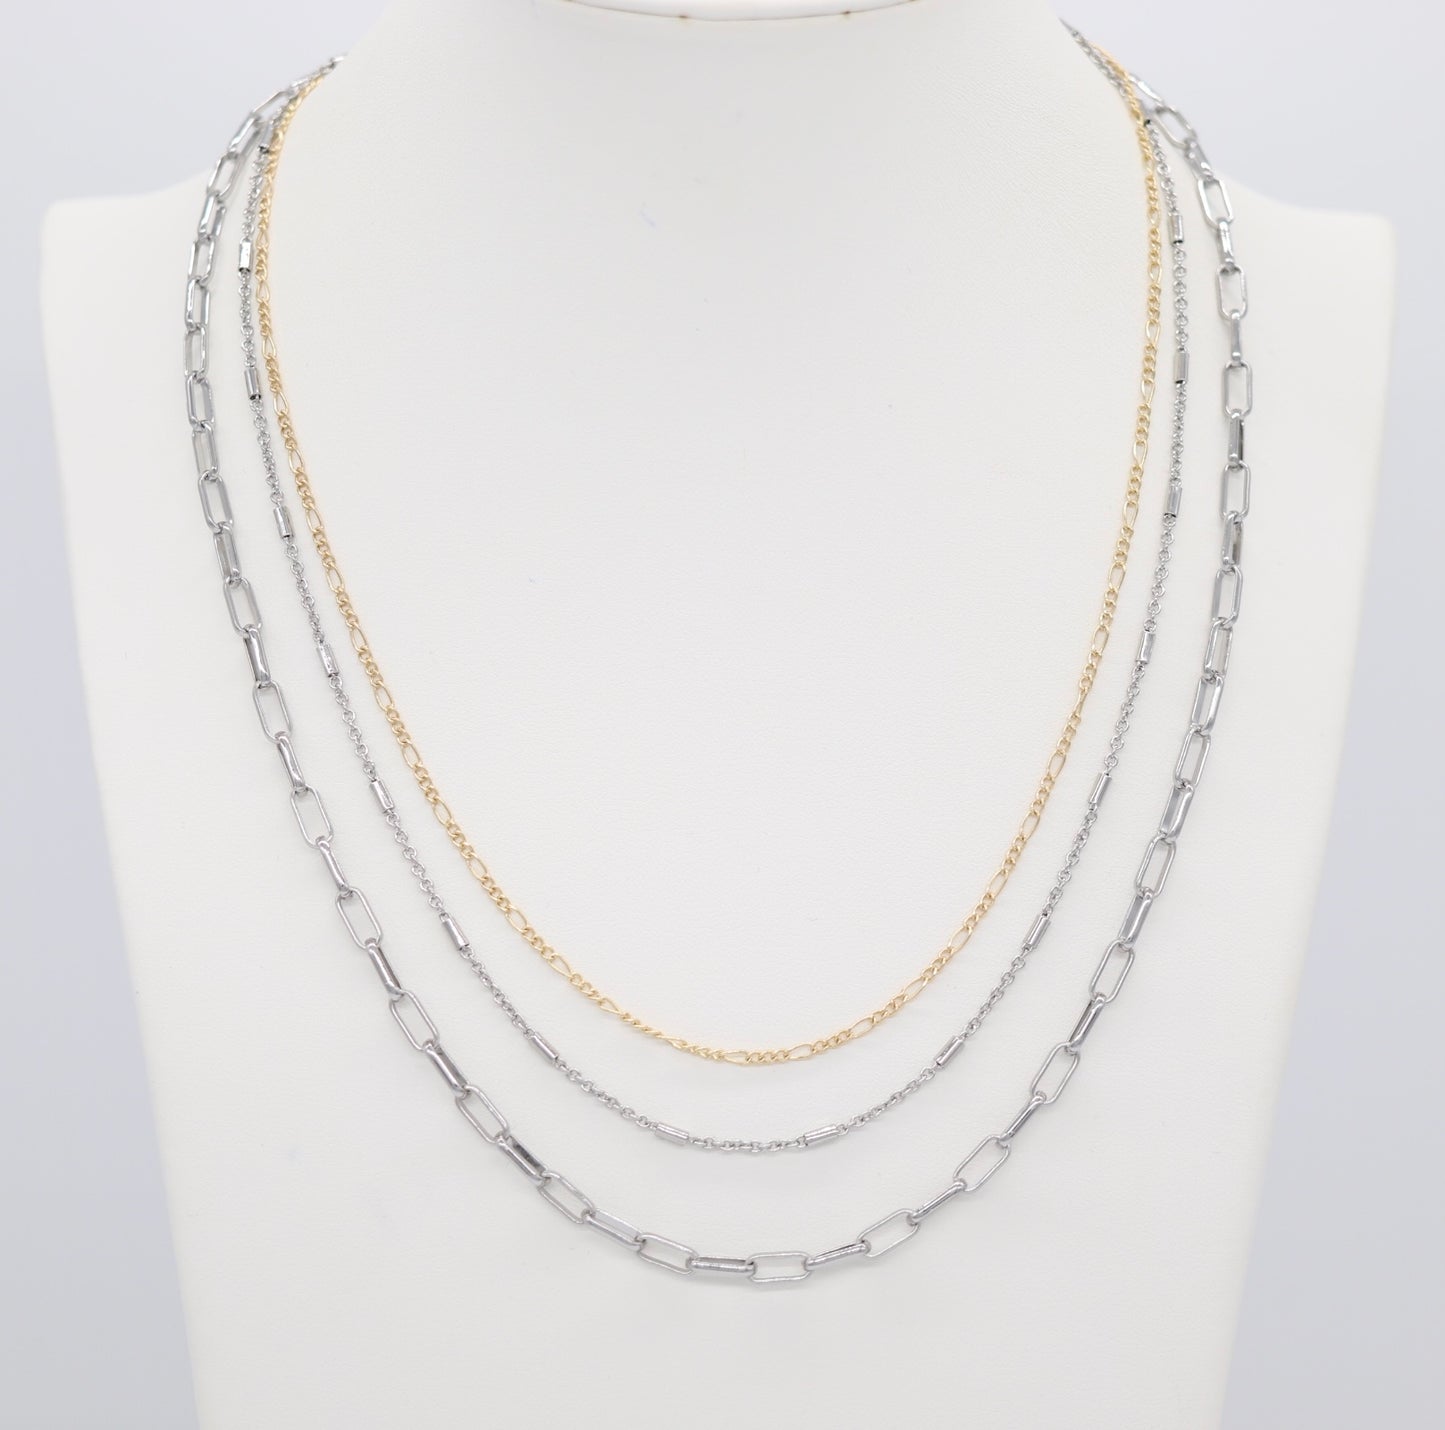 Silver and Gold Three Row Chainlink Necklace